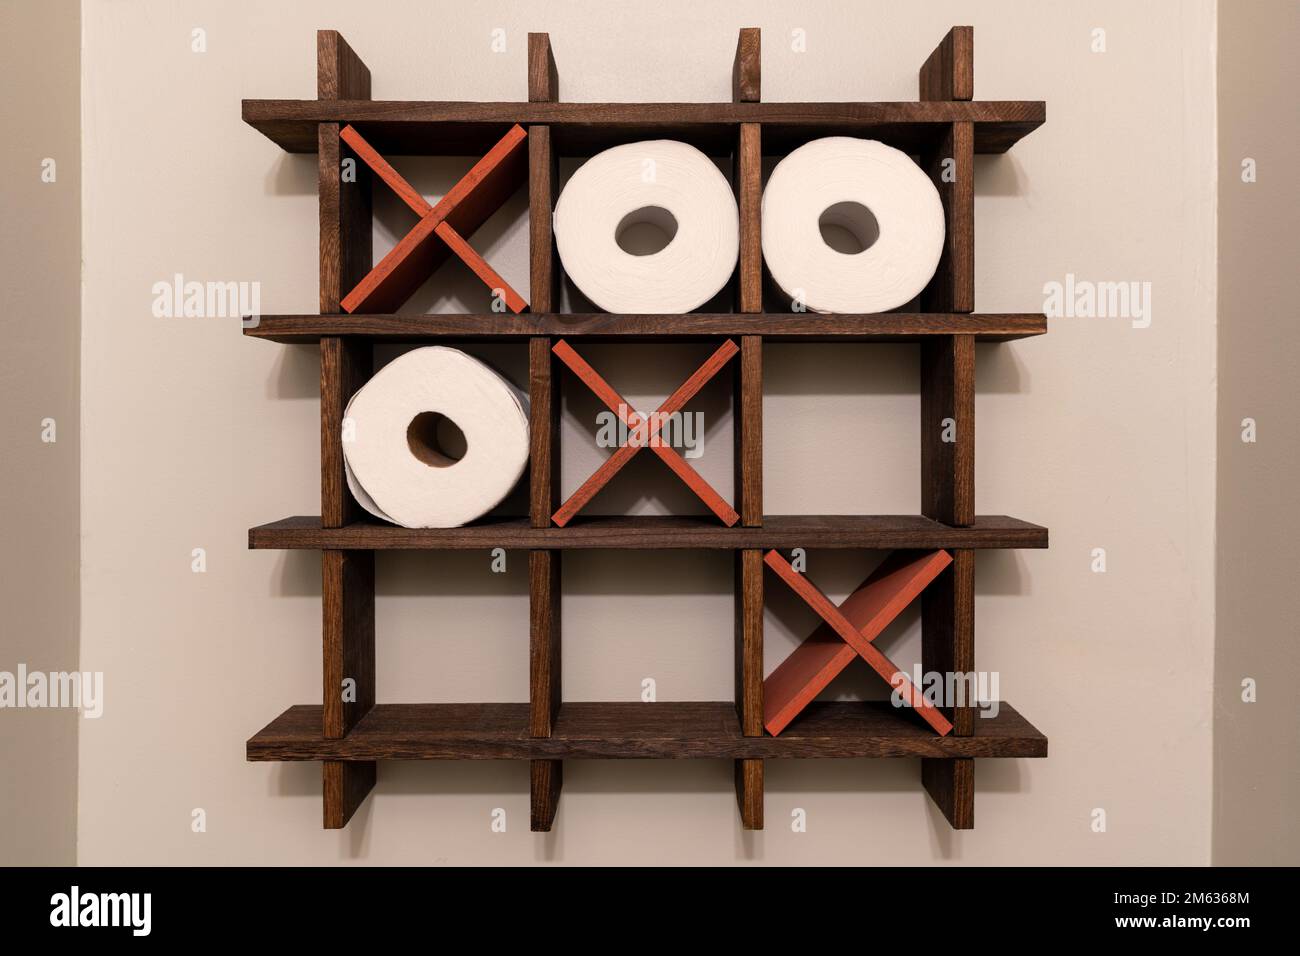 A Tic-Tac-Toe wooden shelf for rolls of toilet paper. Toilet decoration. Noughts and crosses, Xs and Os. Stock Photo